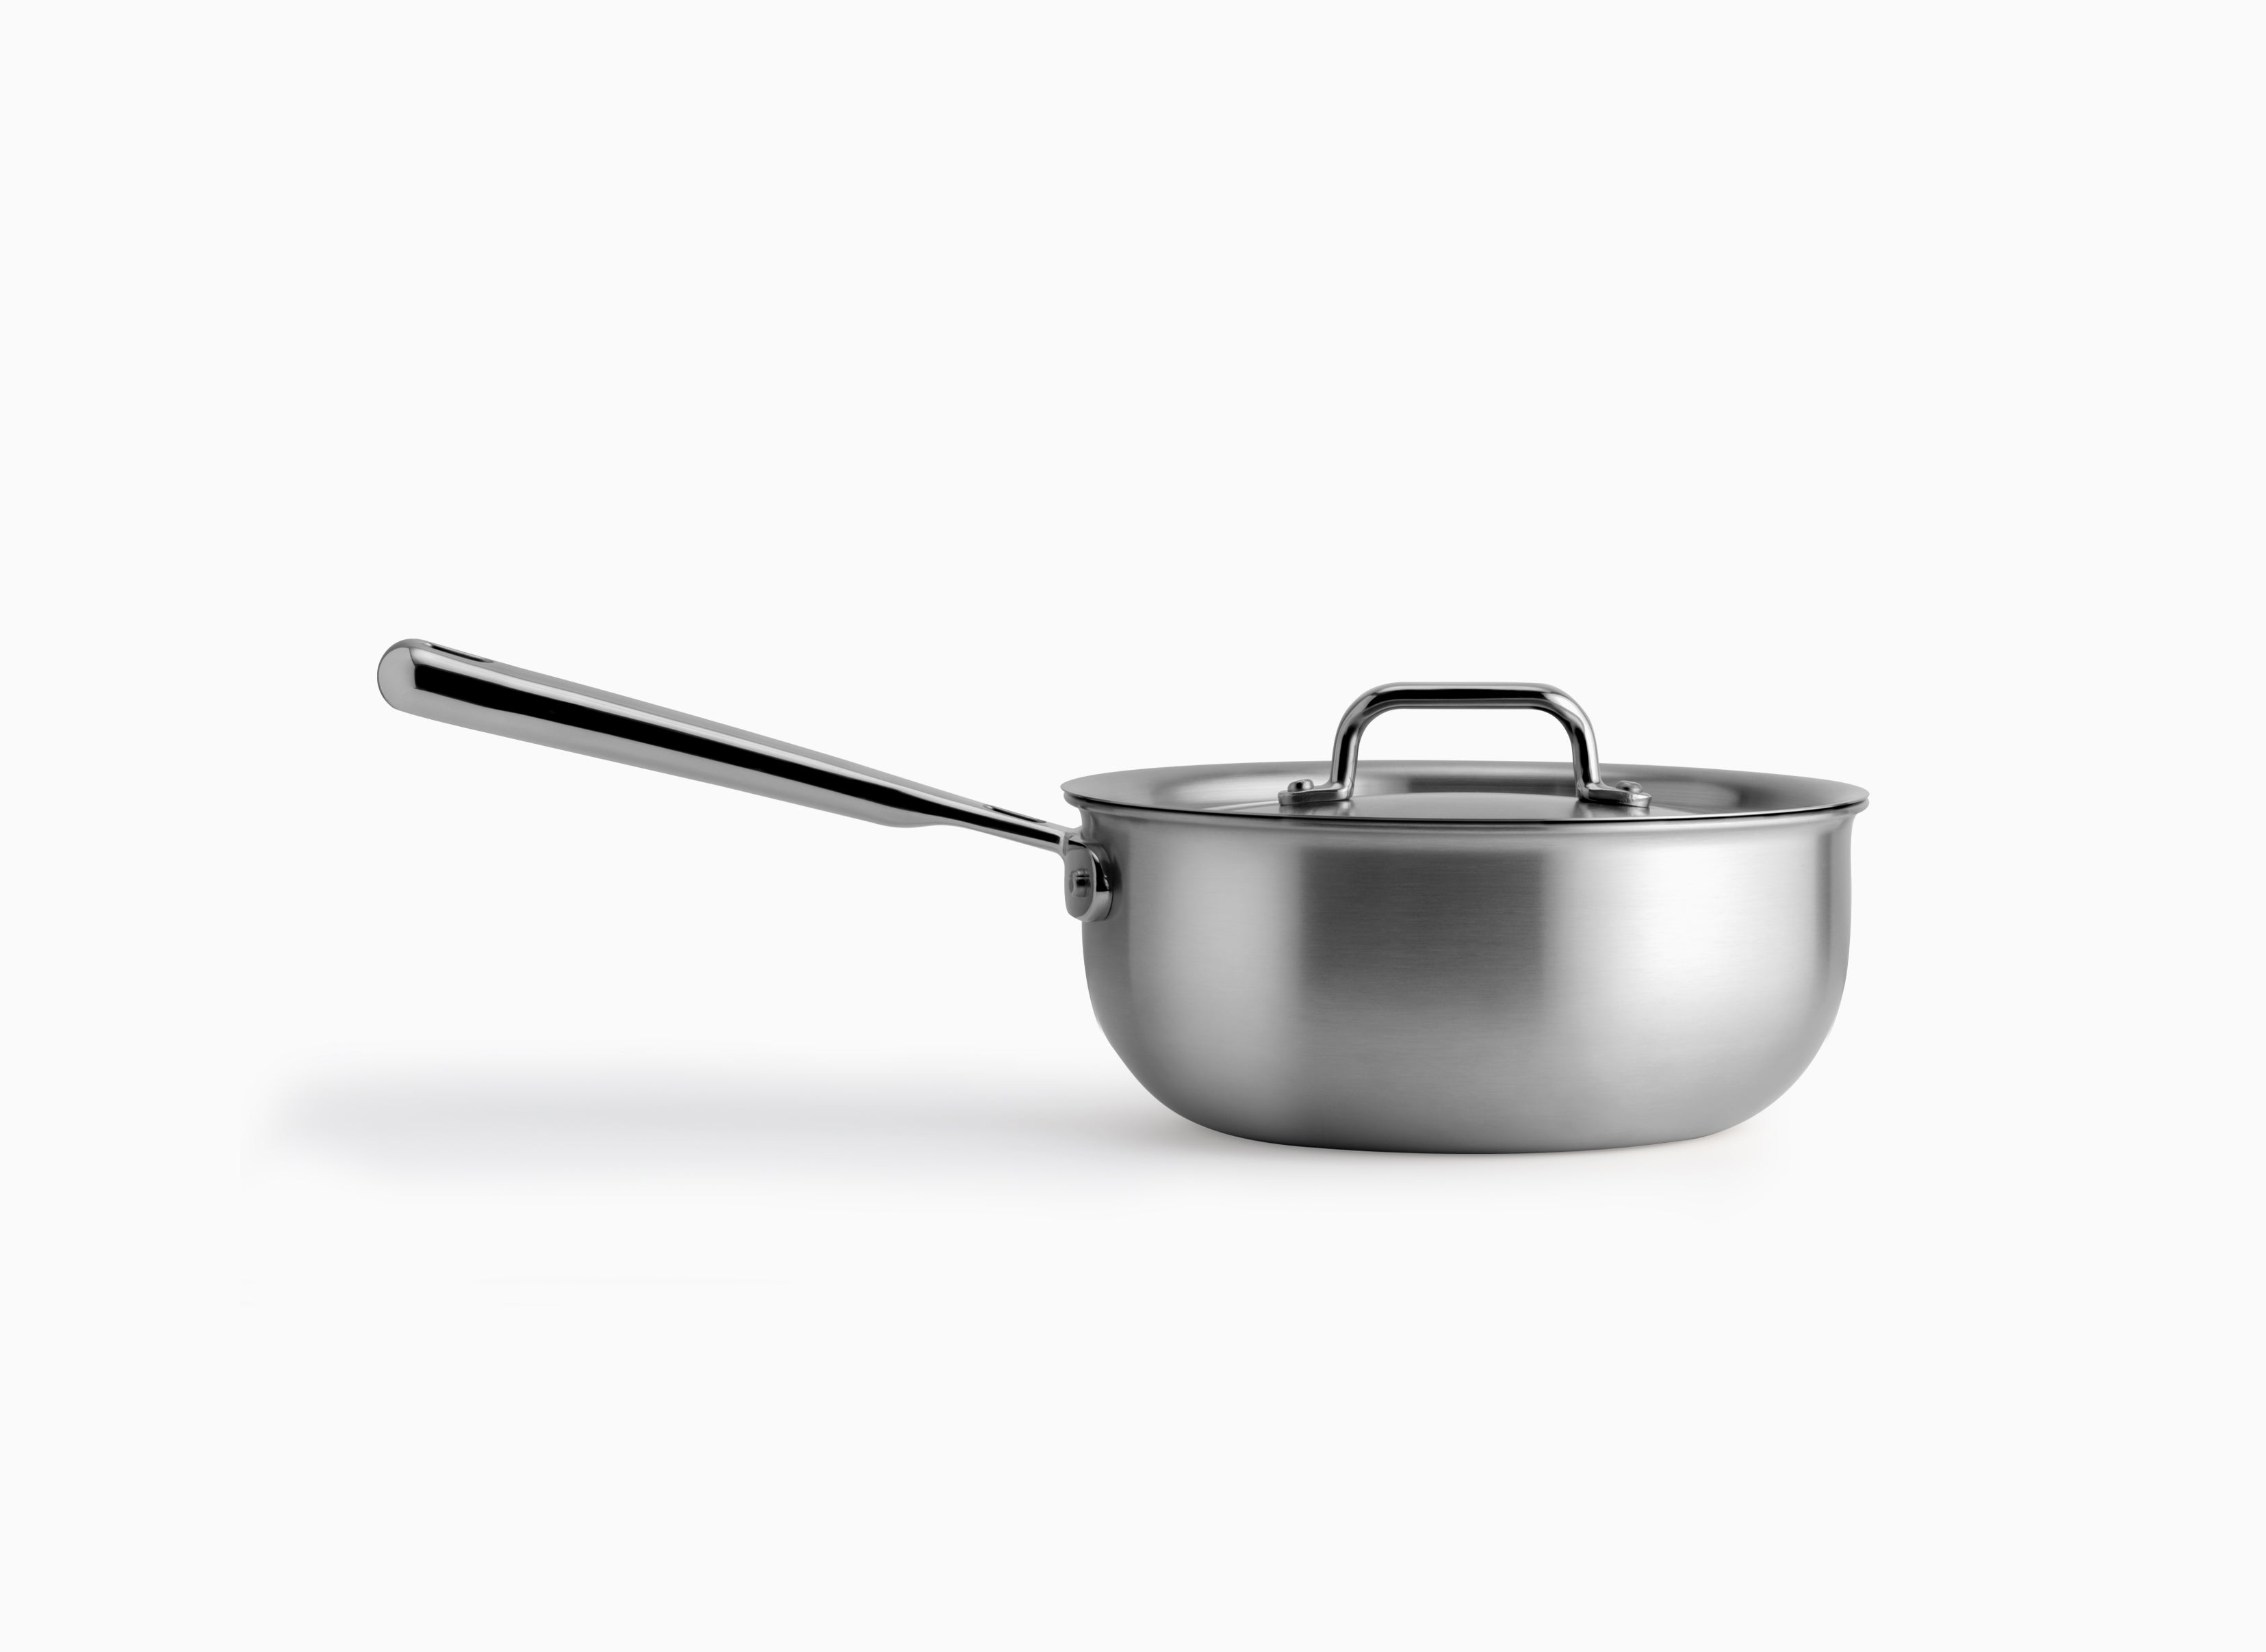 American Kitchen 2-quart Covered Stainless Steel Saucepan